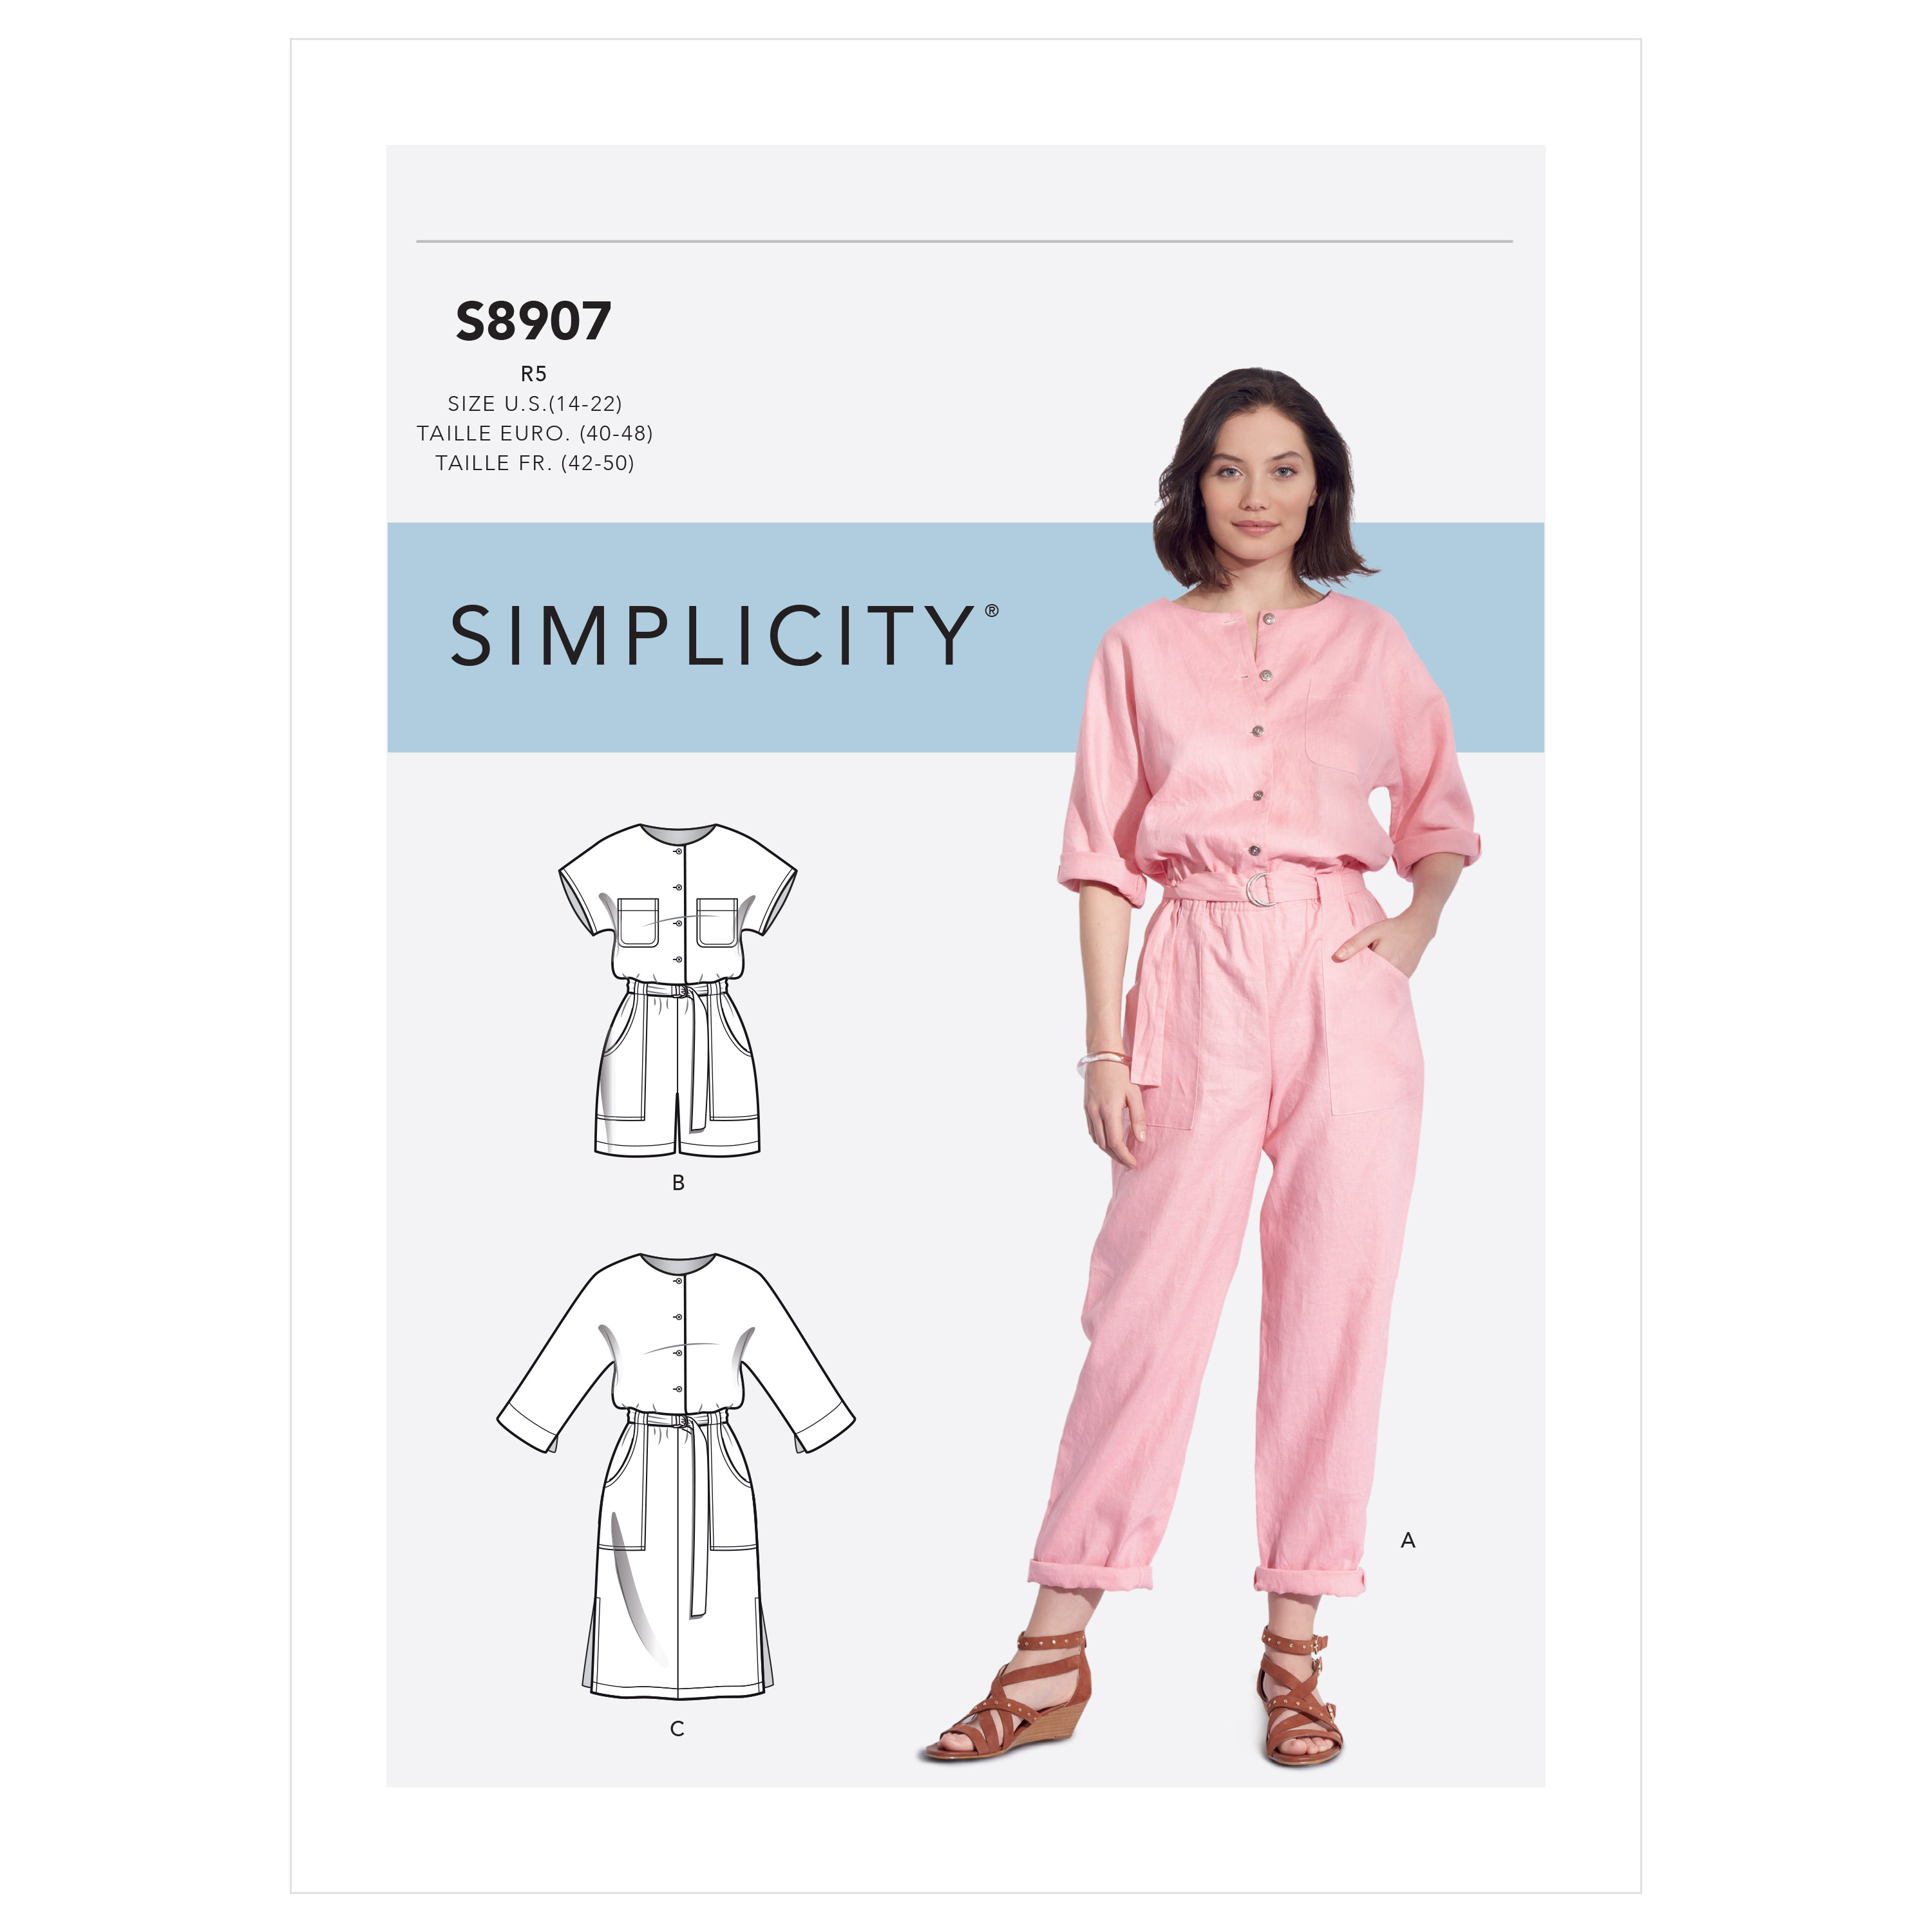 https://images.patternreview.com/sewing/patterns/simplicity/2020/8907/8907.jpg